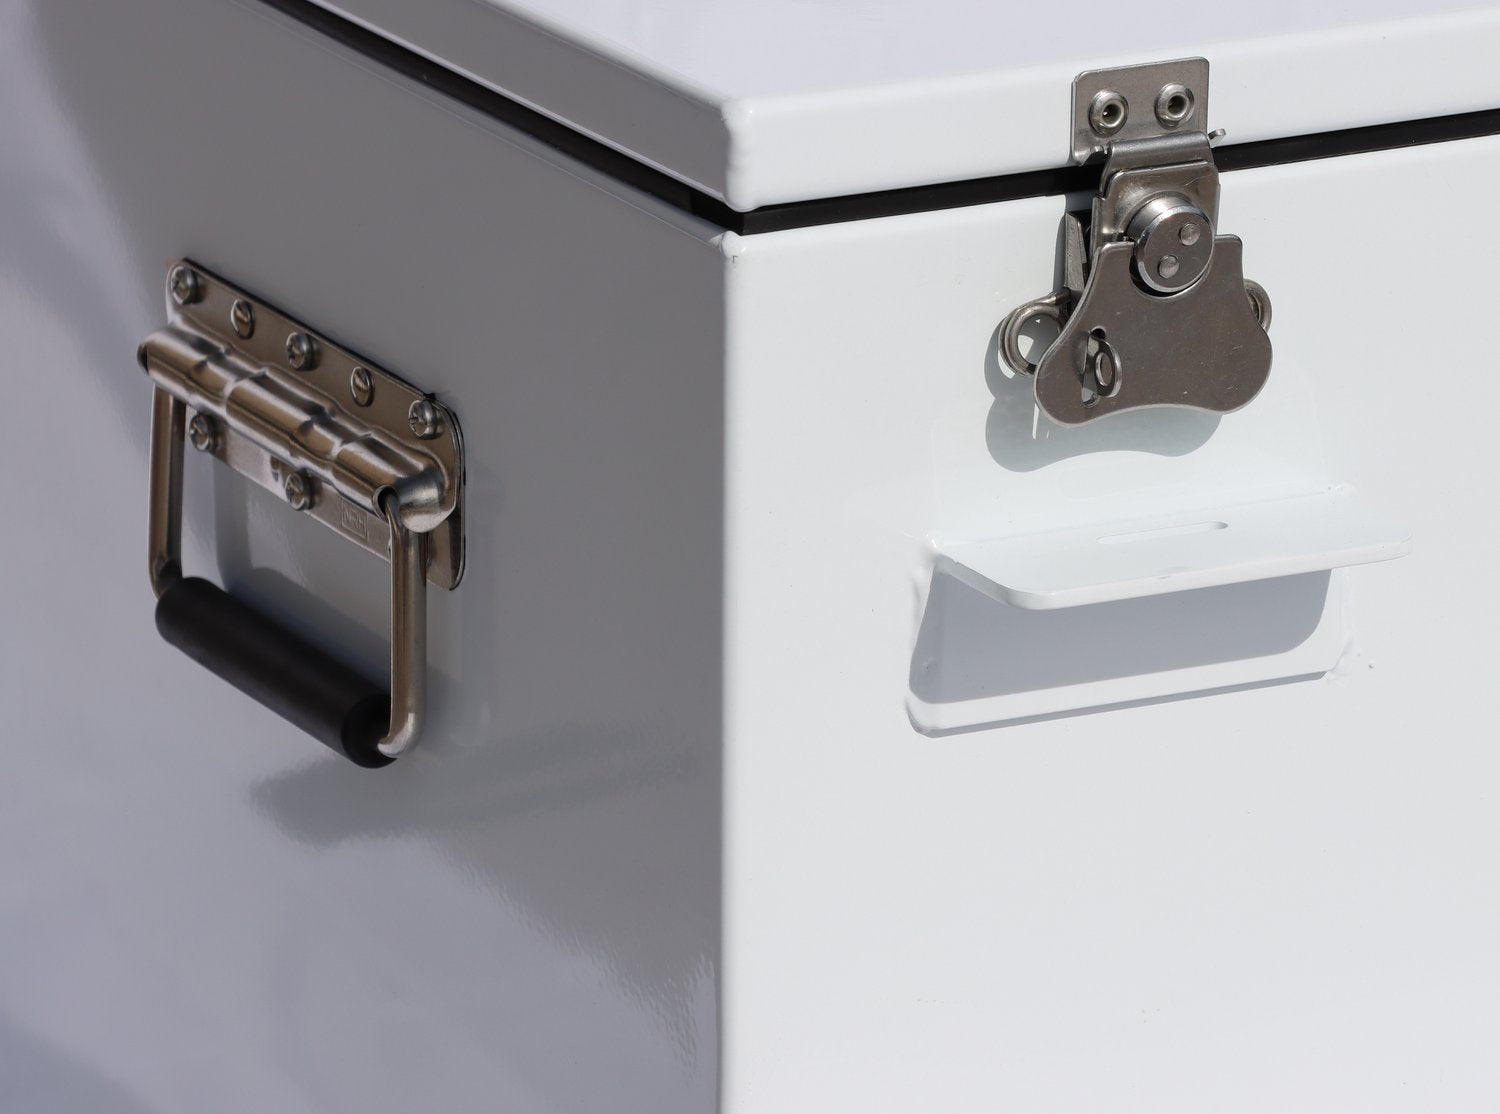 A Rio Craft Powder-Coated Aluminum Drybox, featuring maximum security with a metal handle and latch for a protective buffer.